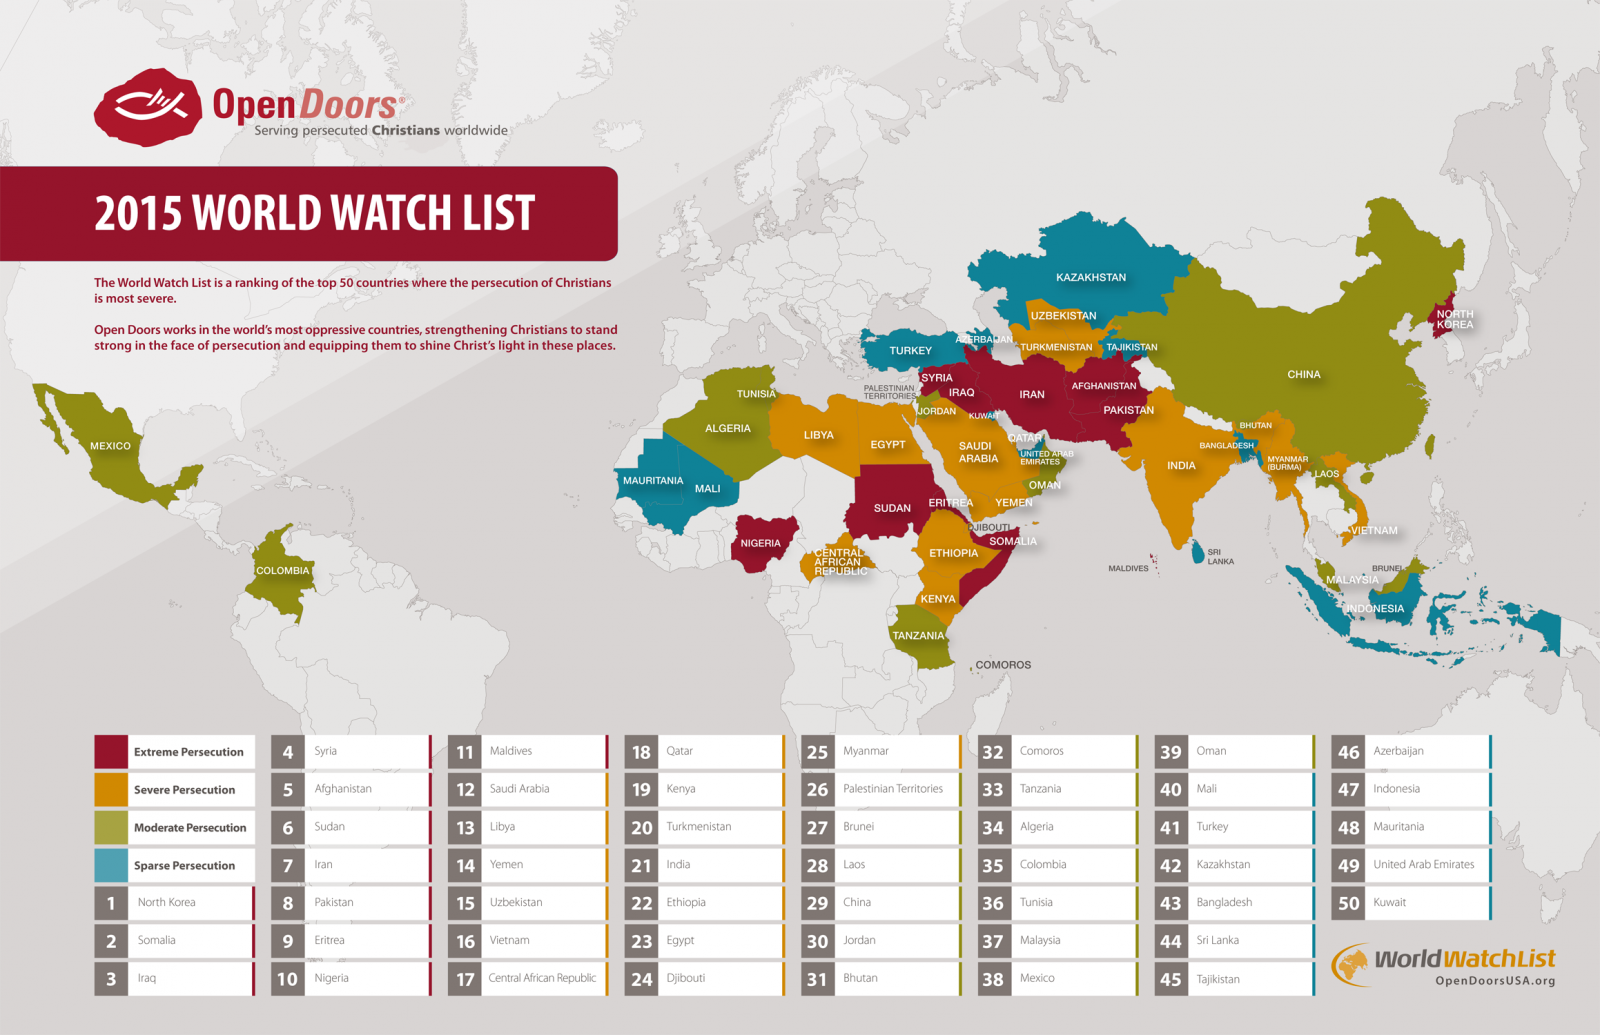 The World Watch List is a ranking of the top 50 countries where the persecution of Christians is most severe.